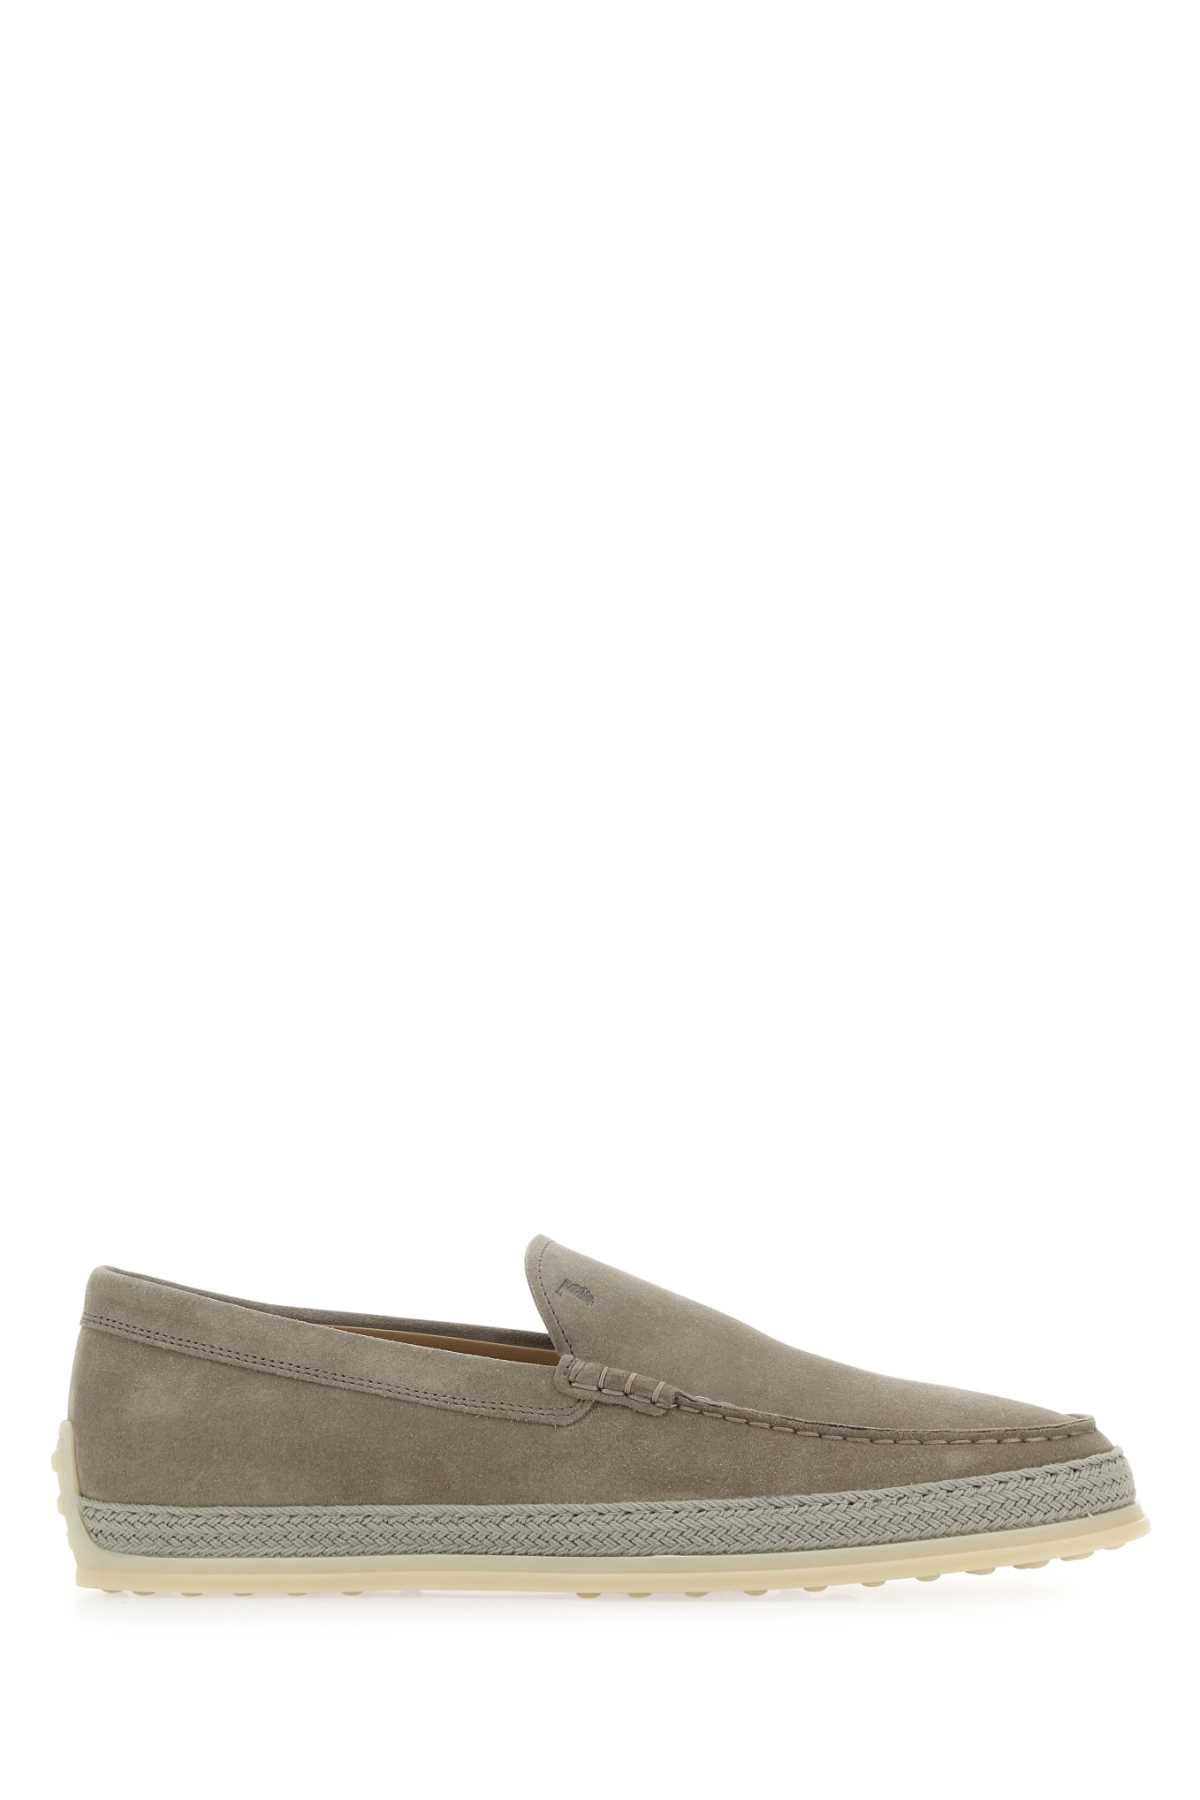 TOD'S Sage Green Suede Loafers - Walmart.com